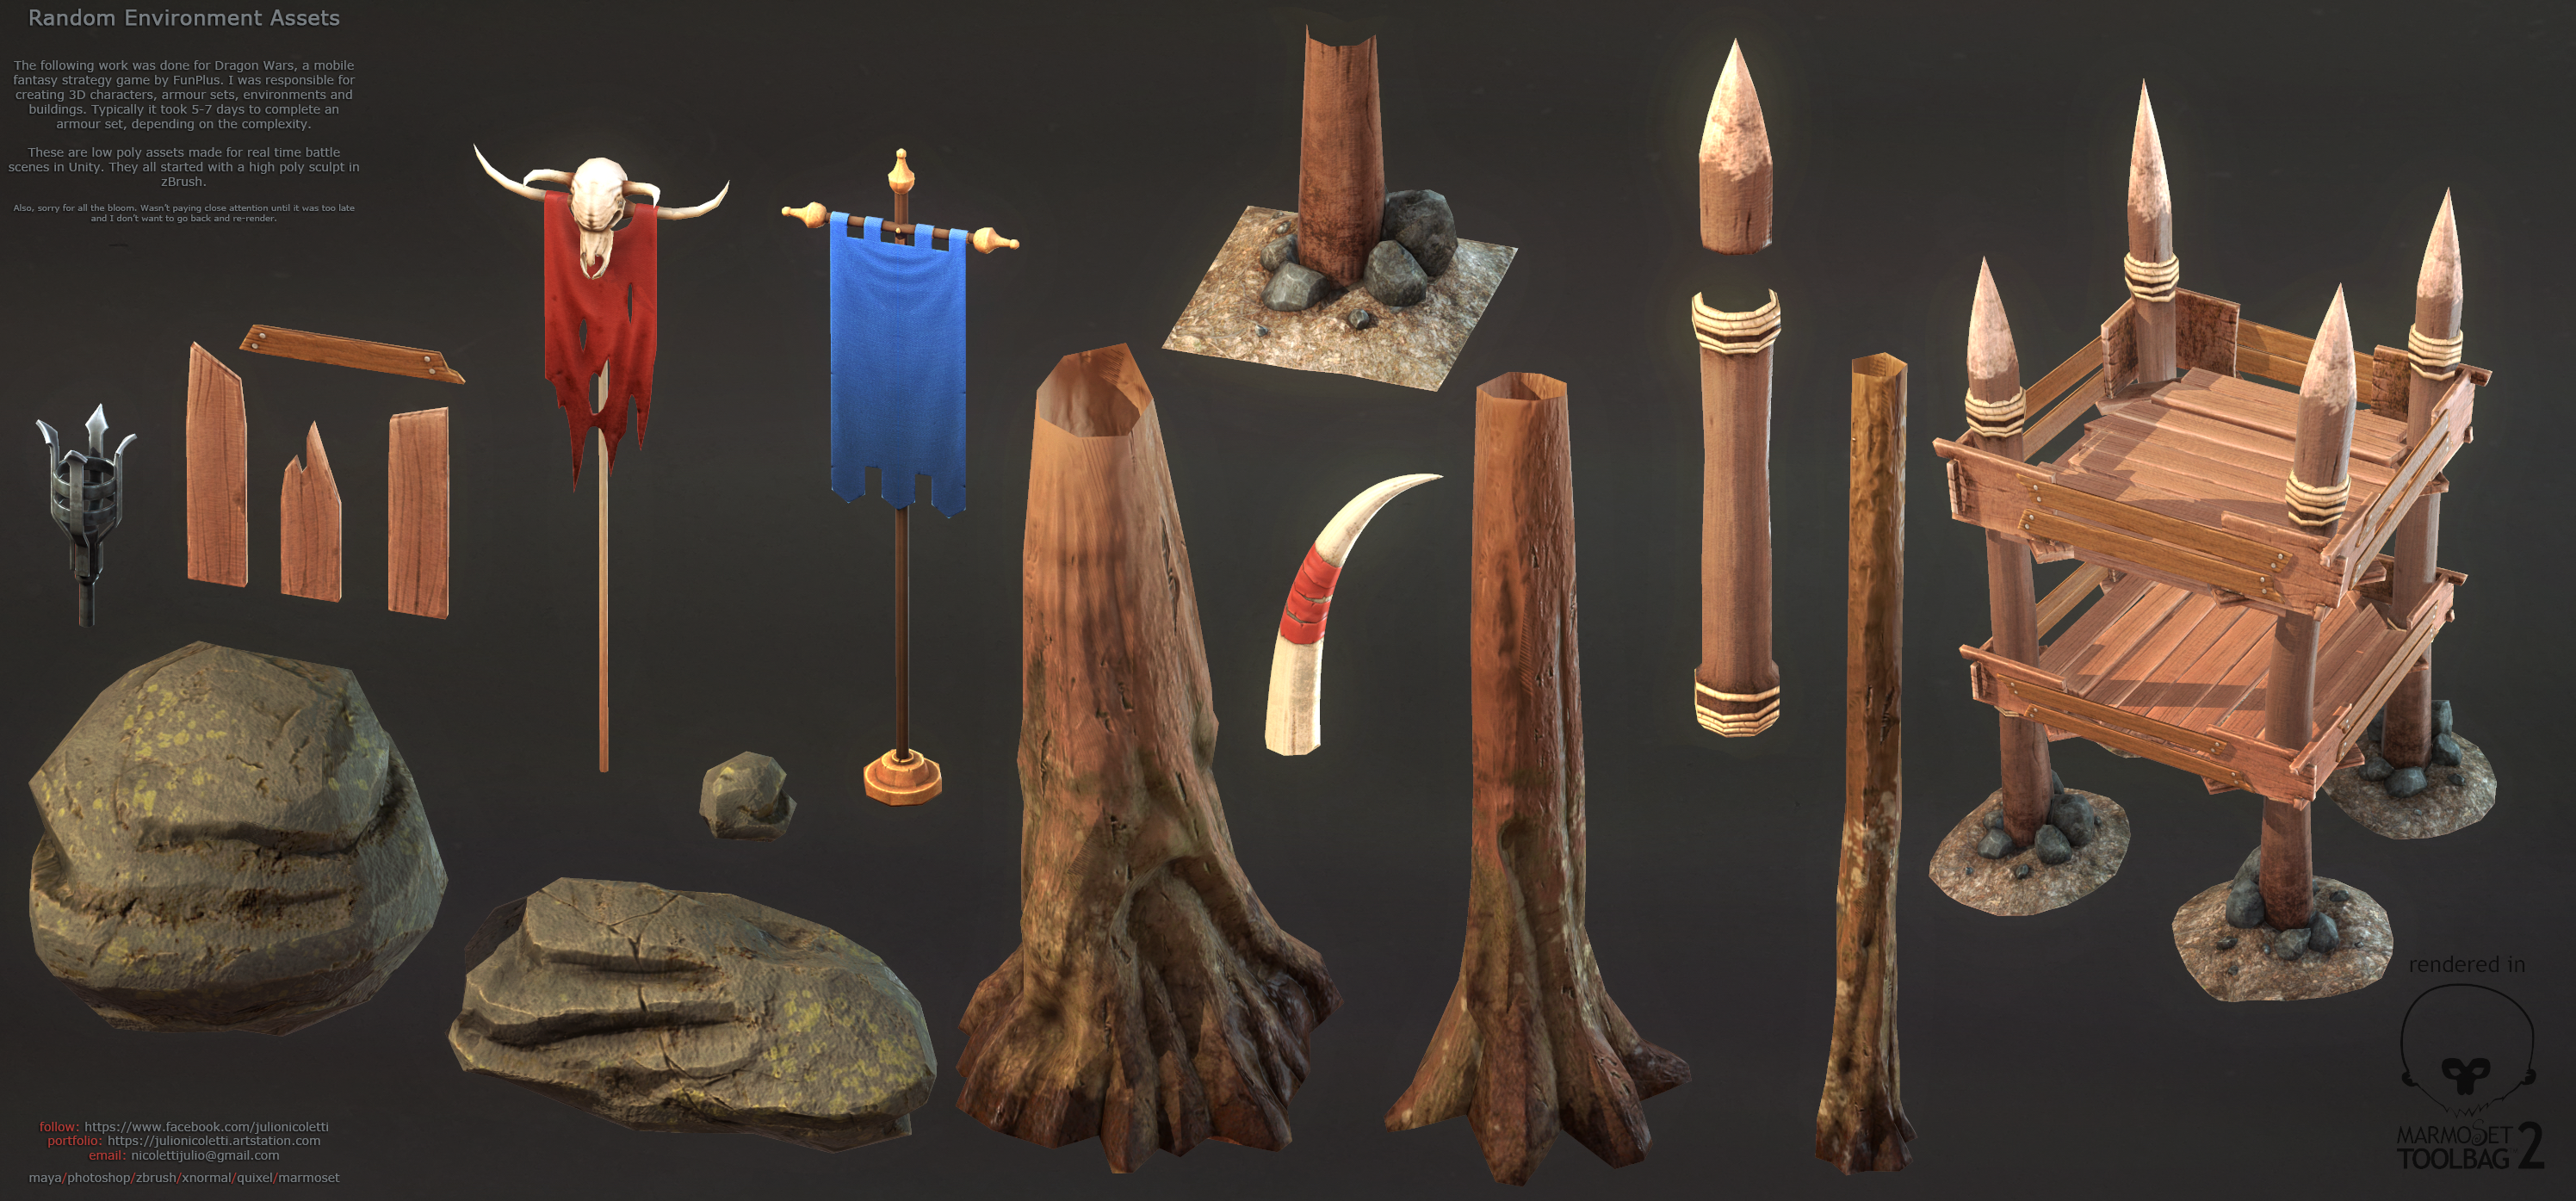 random_environment_assets_by_julionicoletti-d942ag2.png